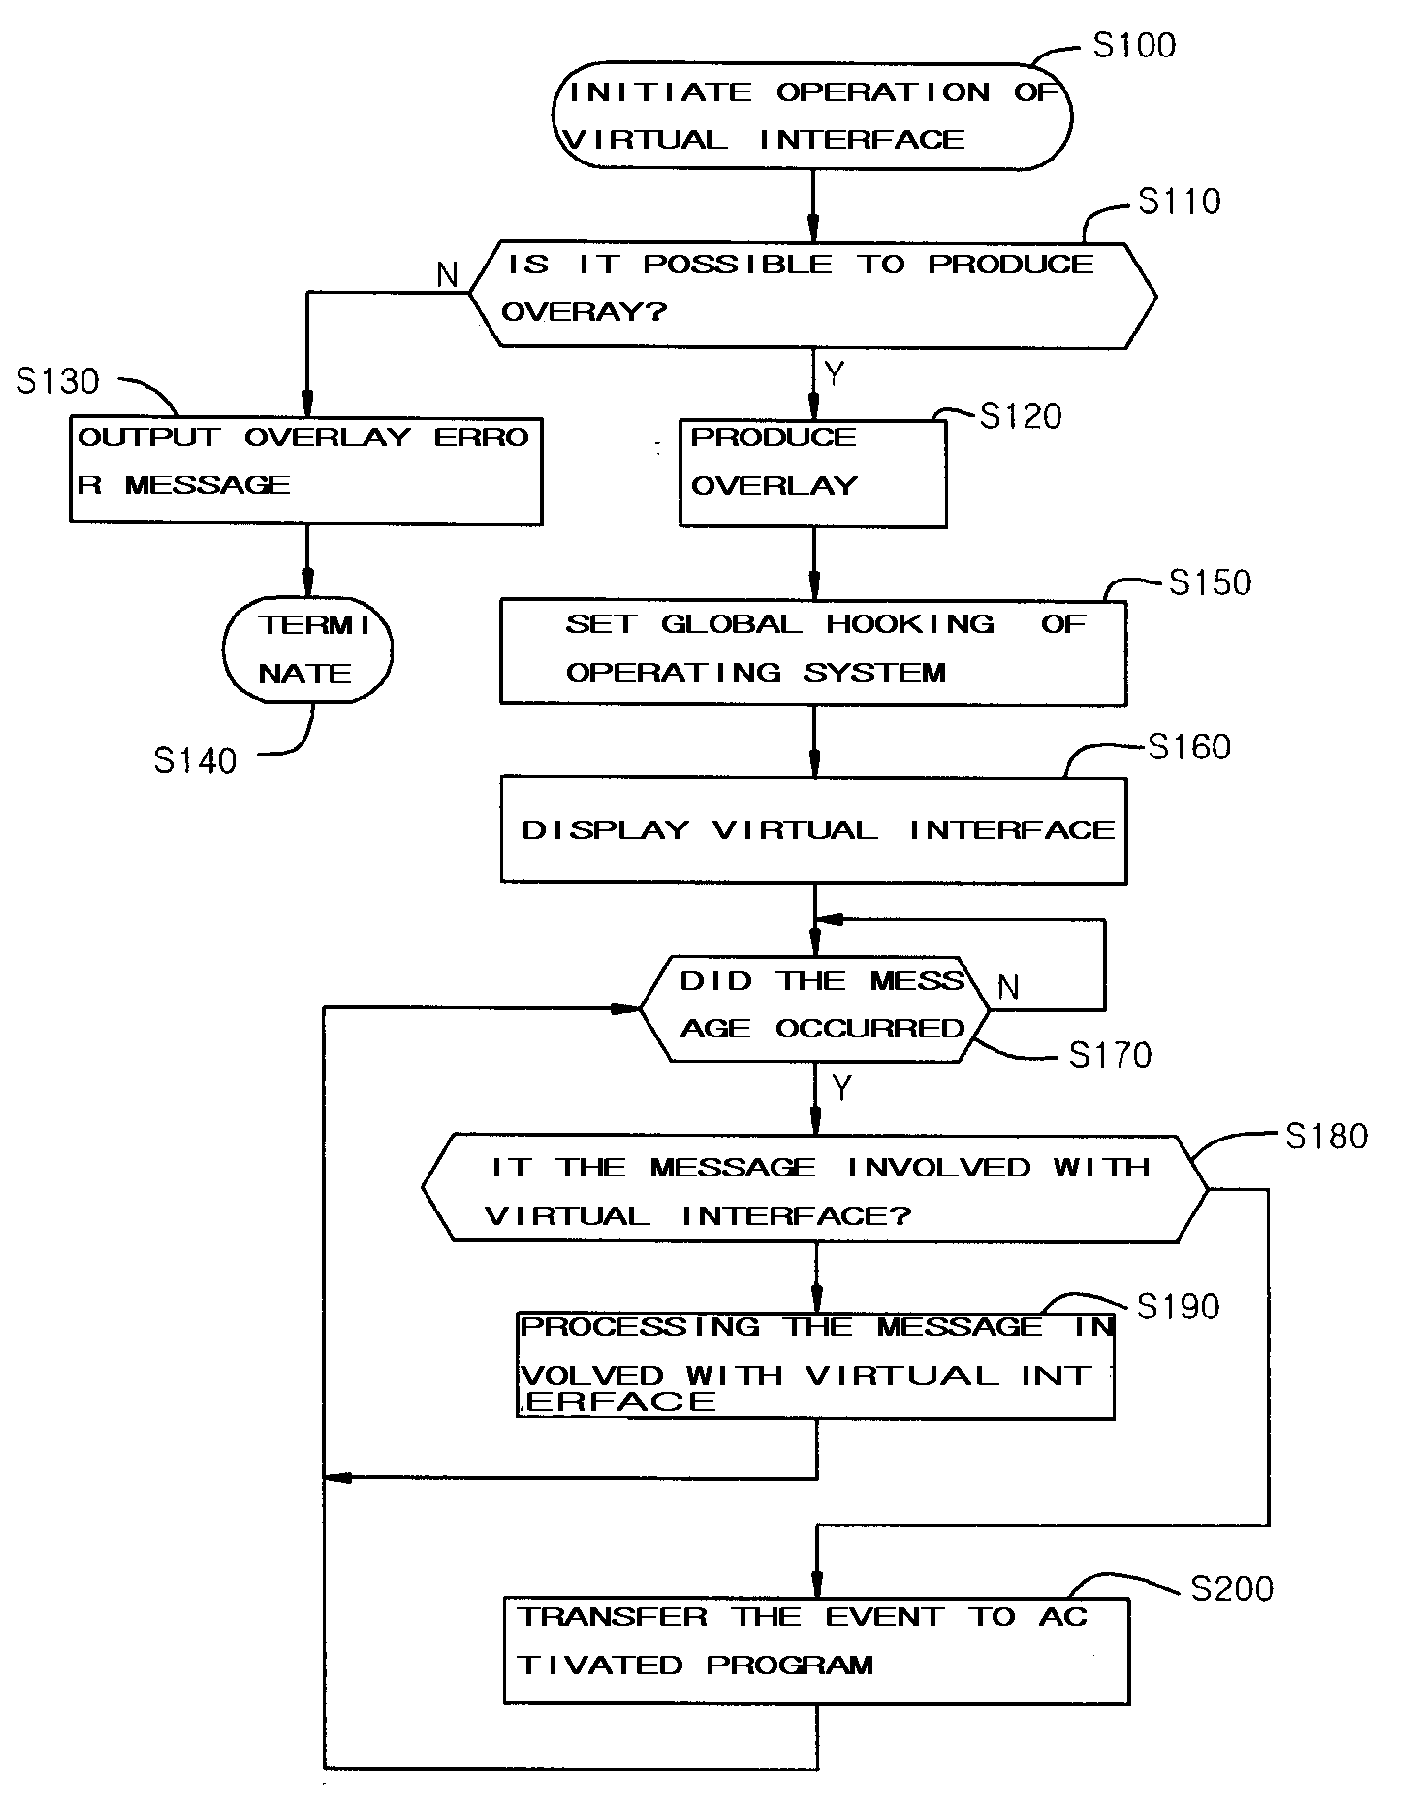 System and method for providing virtual interface